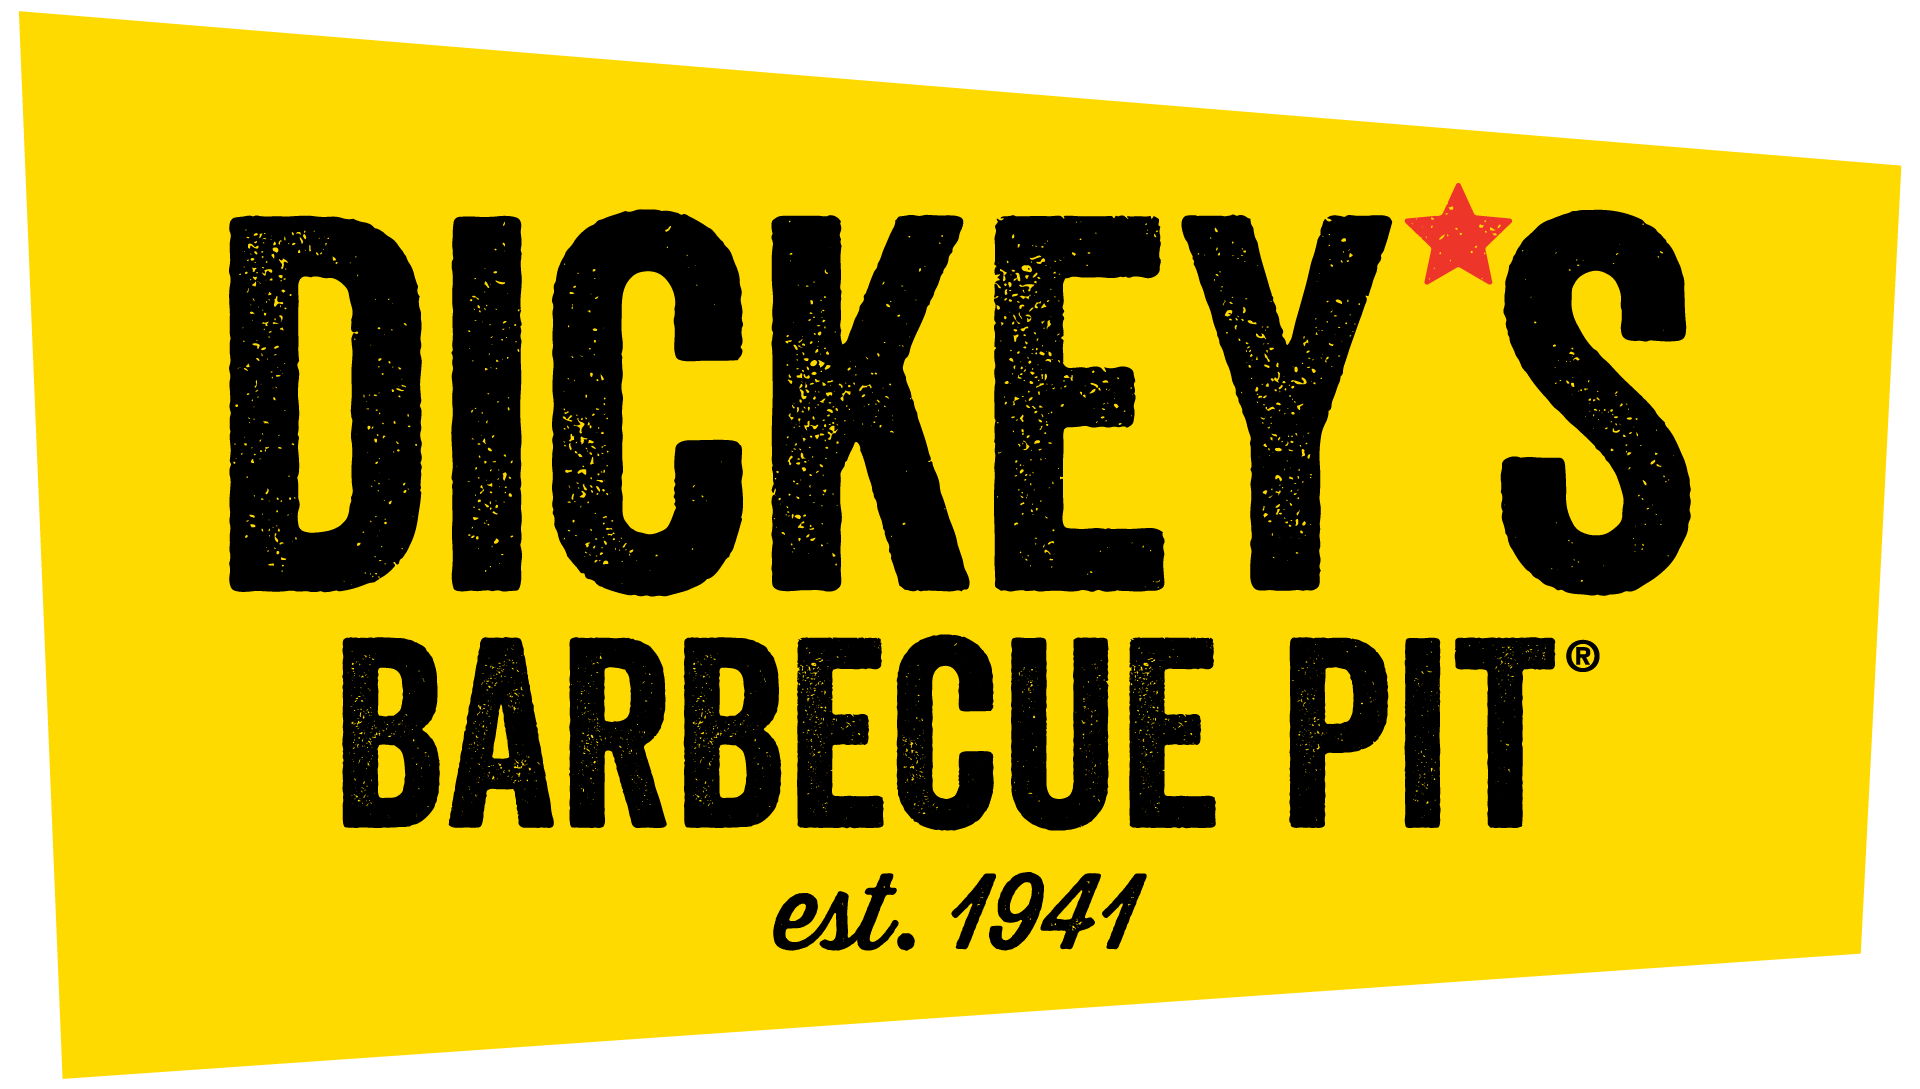 Dickey’s Barbecue of